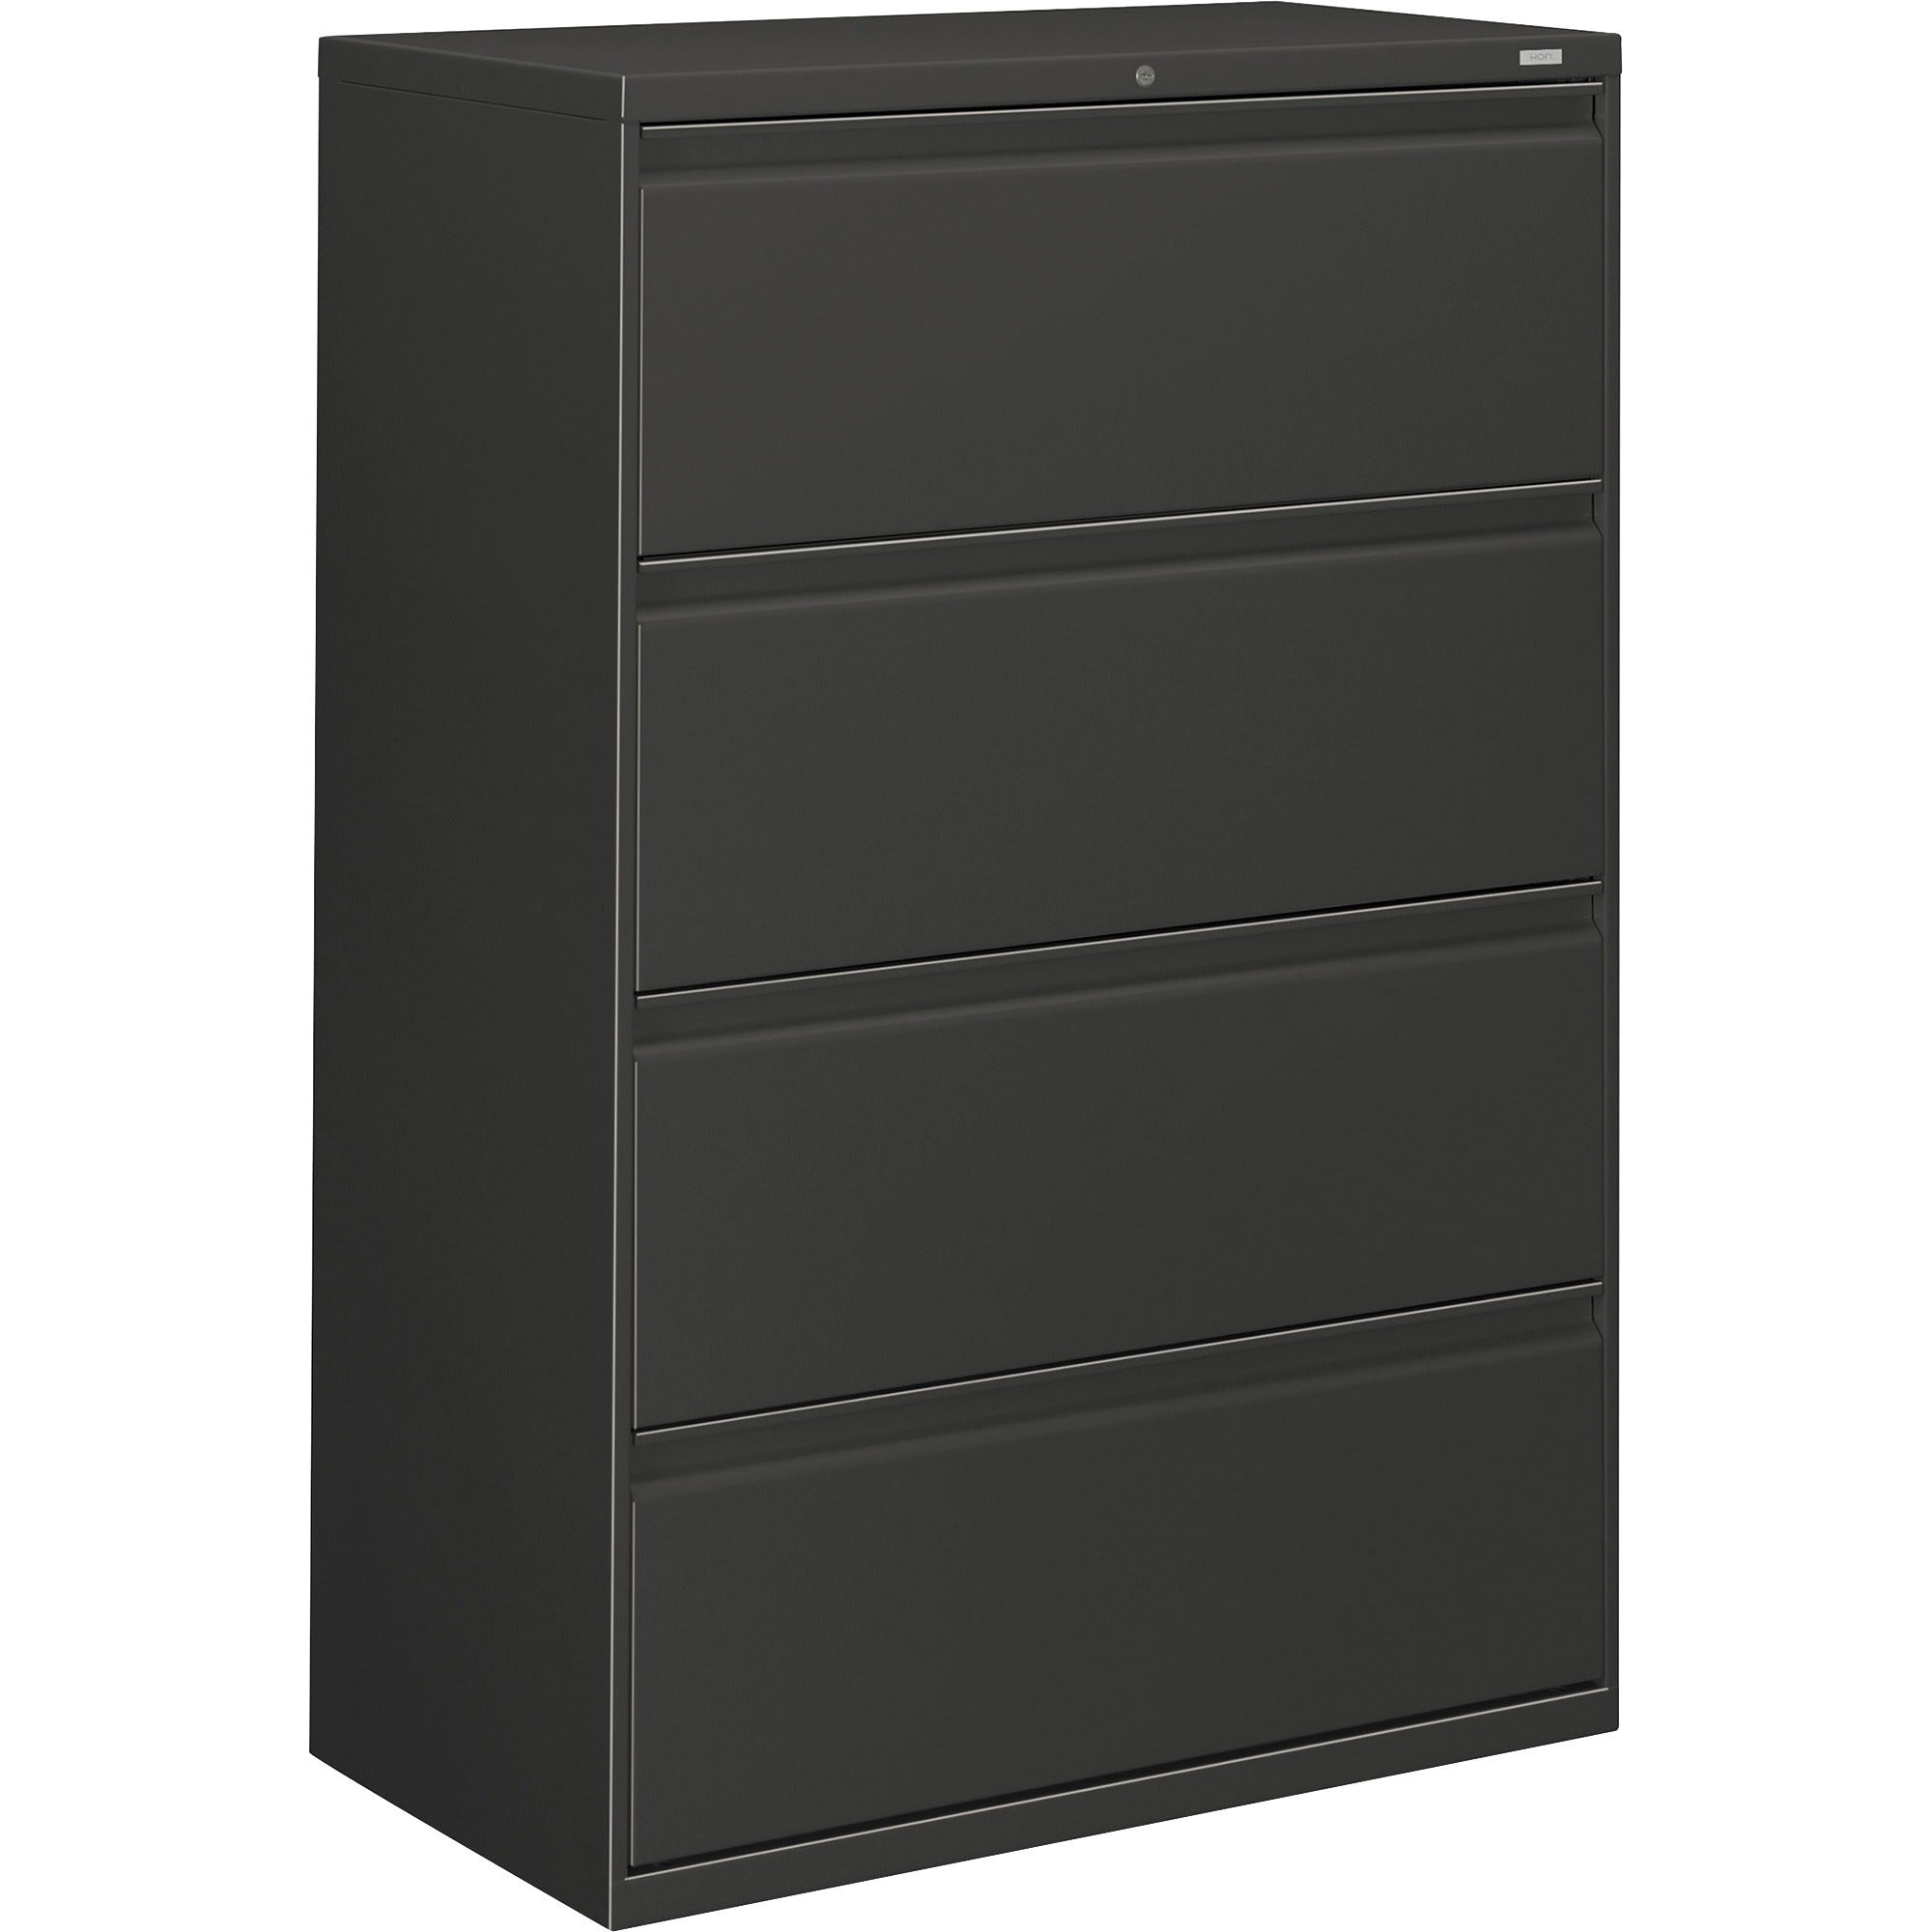 HON Brigade 800 H884 Lateral File - 36" x 18"53.3" - 4 Drawer(s) - Finish: Charcoal - 